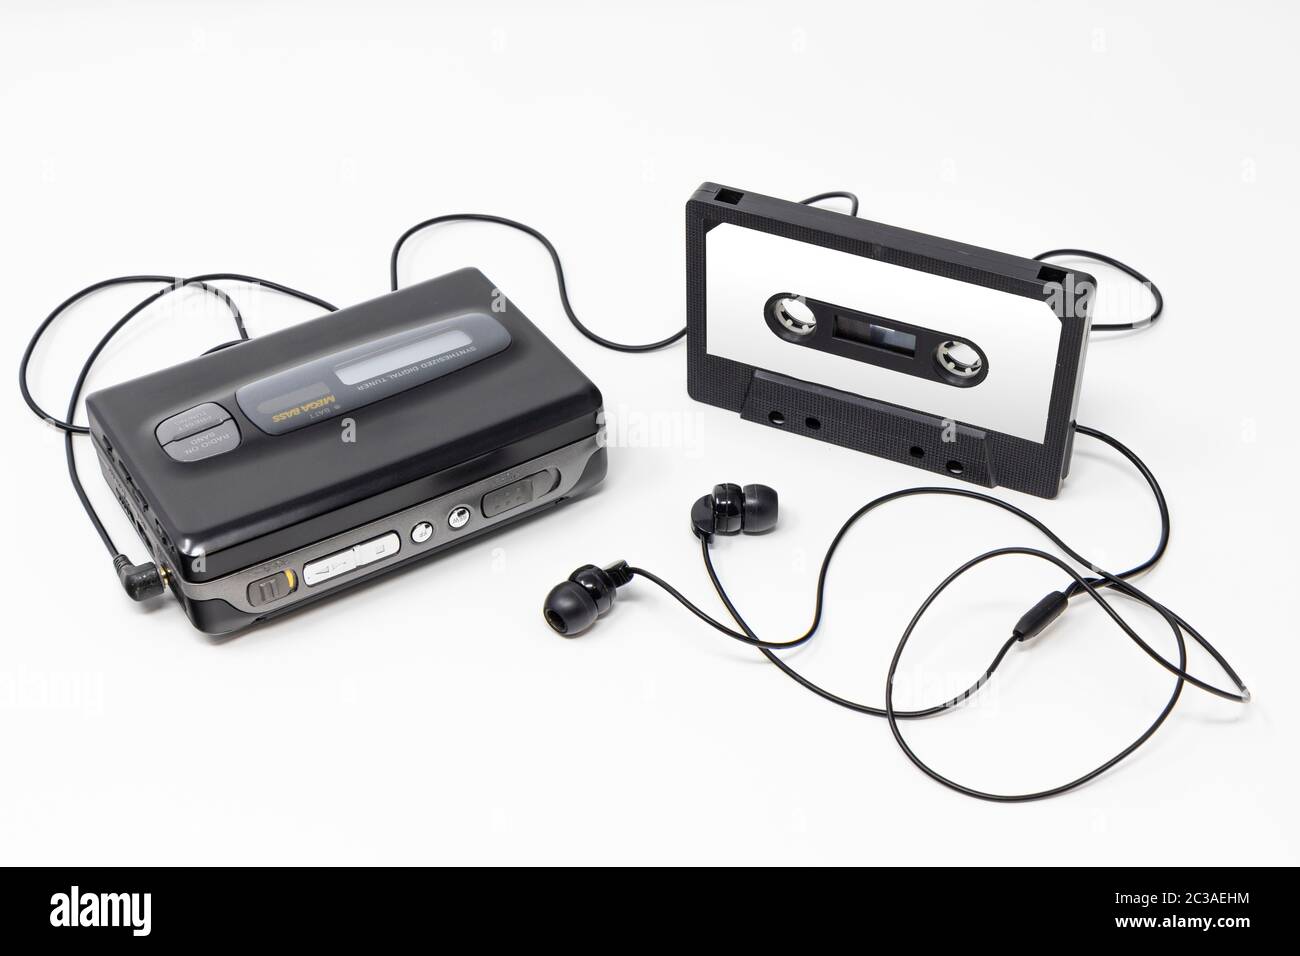 Vintage audio player. Old fashioned portable cassette player, cult object, icon and symbol of the 80s and 90s. Blank audio tape and headphones isolate Stock Photo